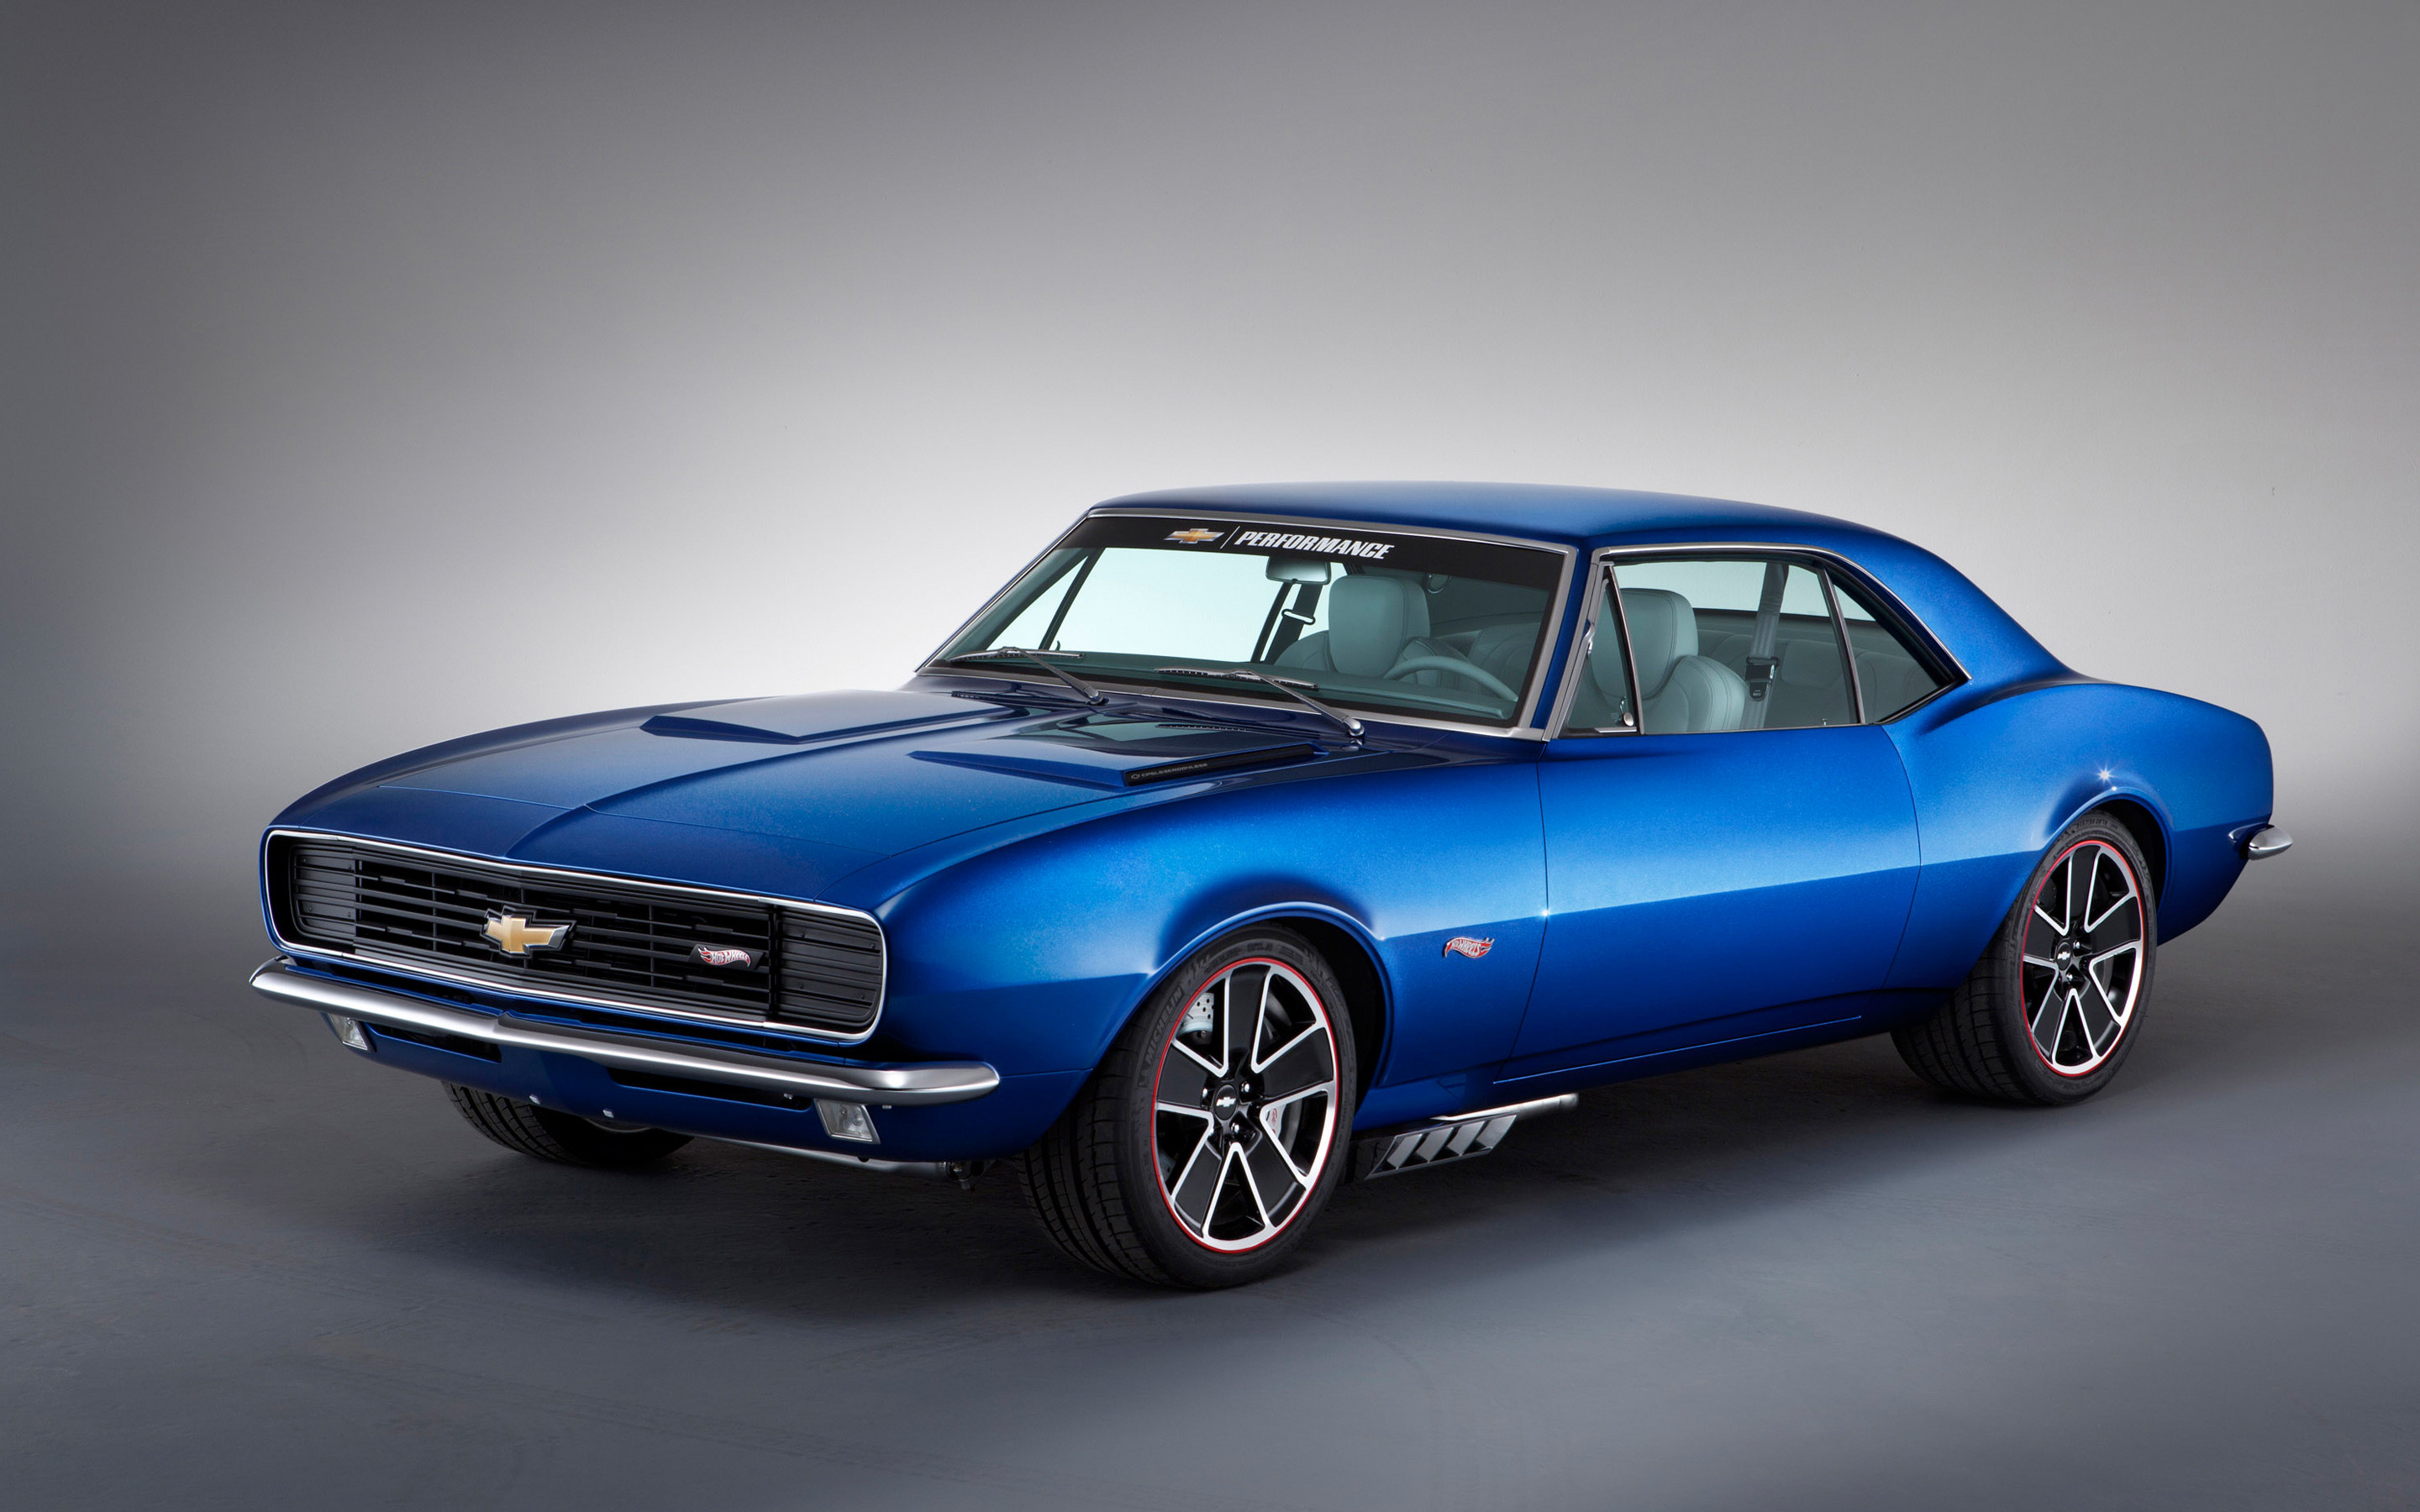 2880x1800 ... Chevrolet Wallpaper by Chevrolet Camaro Wheels 1967 Wallpapers Hd  Wallpapers ...